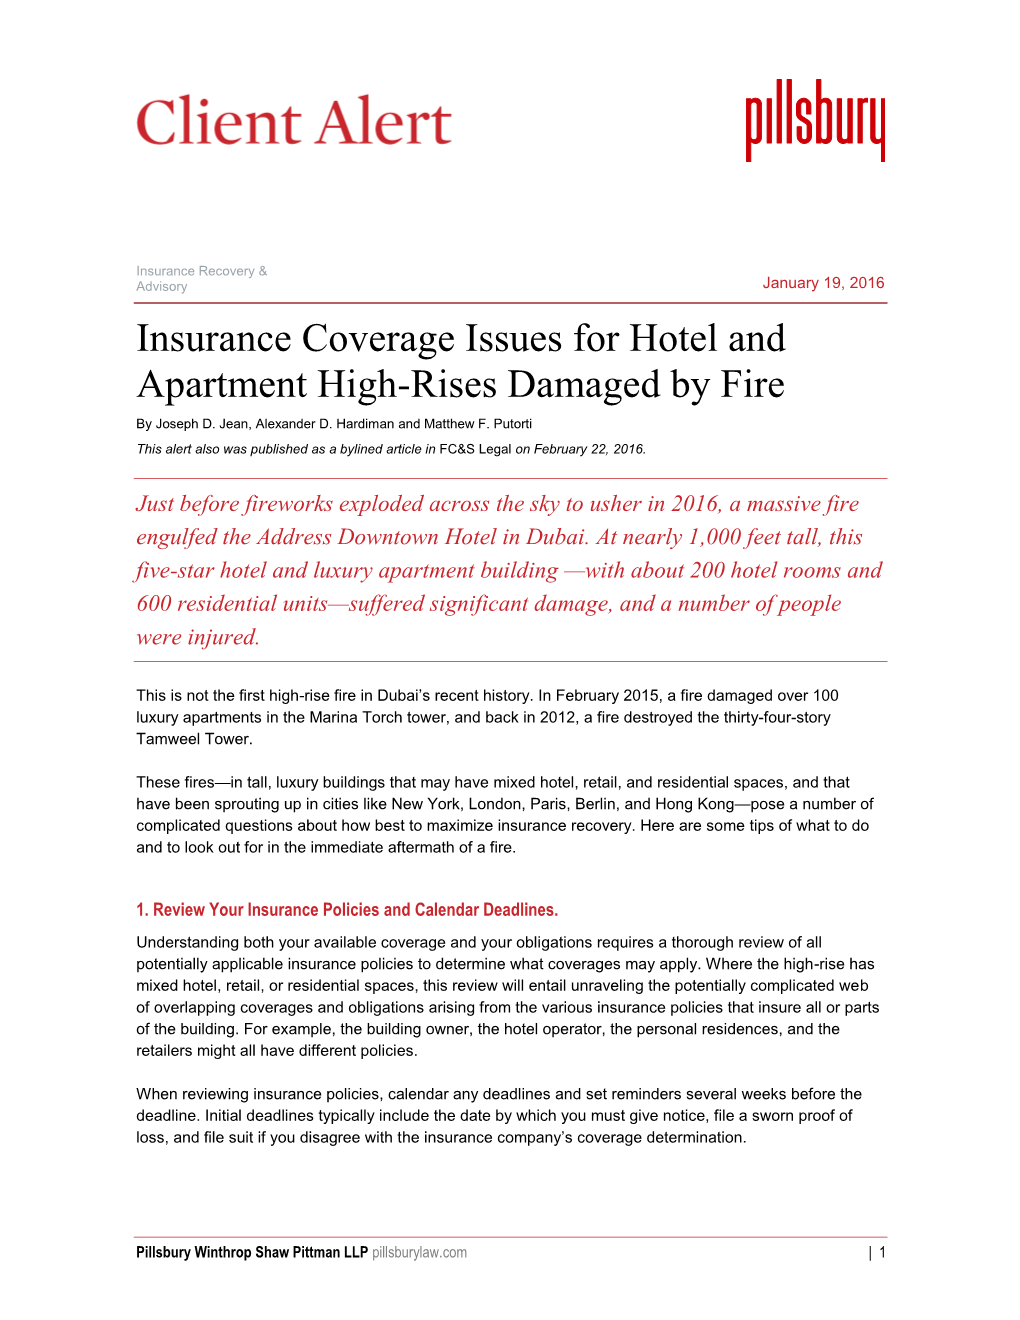 Insurance Coverage Issues for Hotel and Apartment High-Rises Damaged by Fire by Joseph D